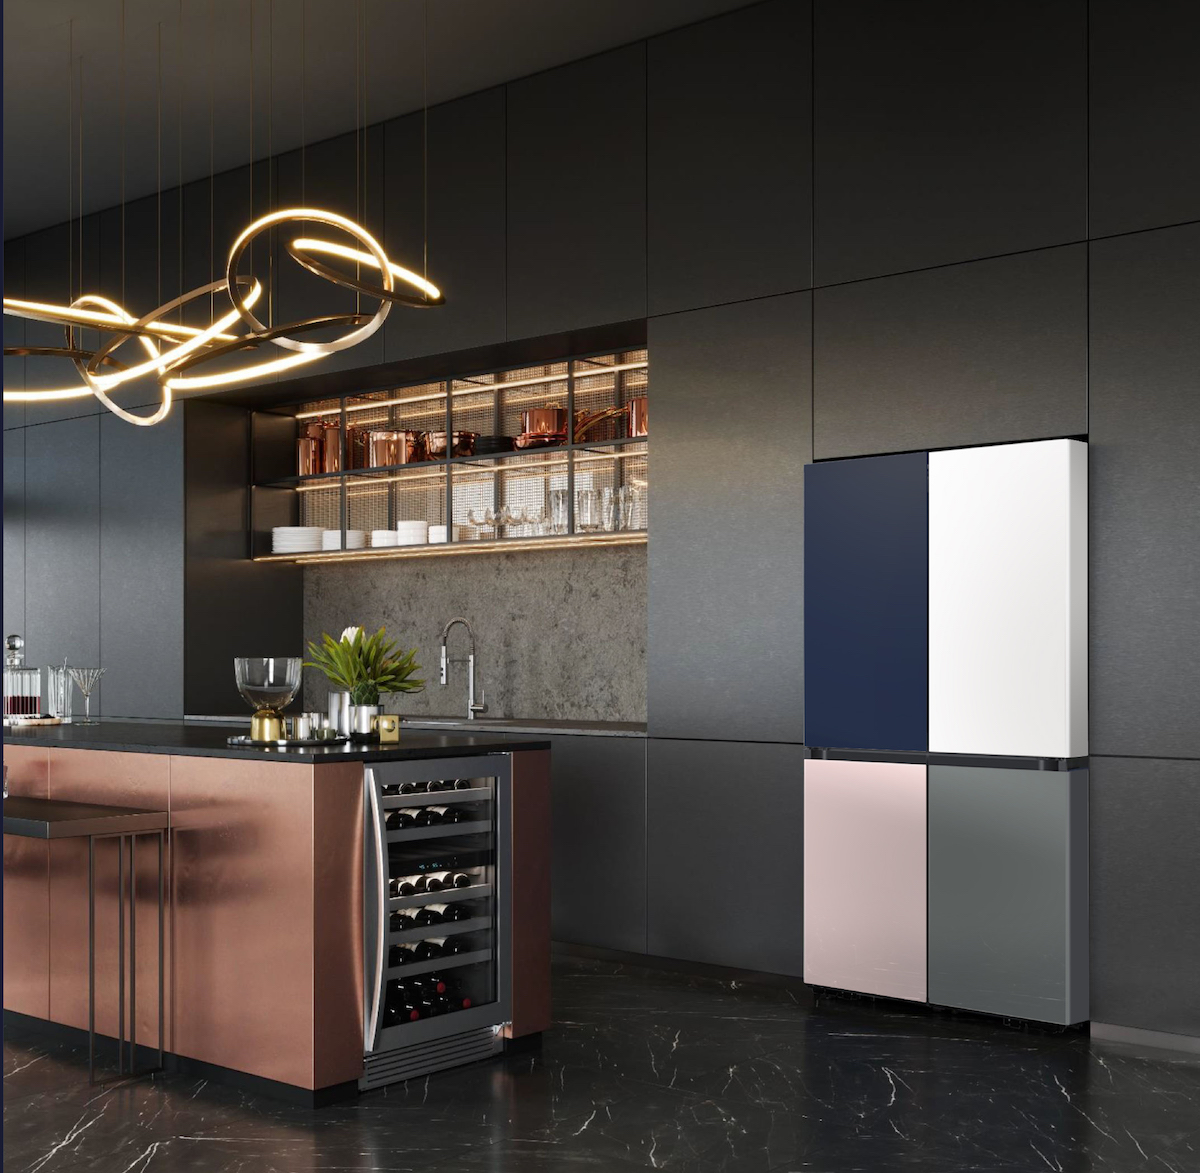 SPONSORED: Finally, a fridge that matches your taste | Woolworths TASTE